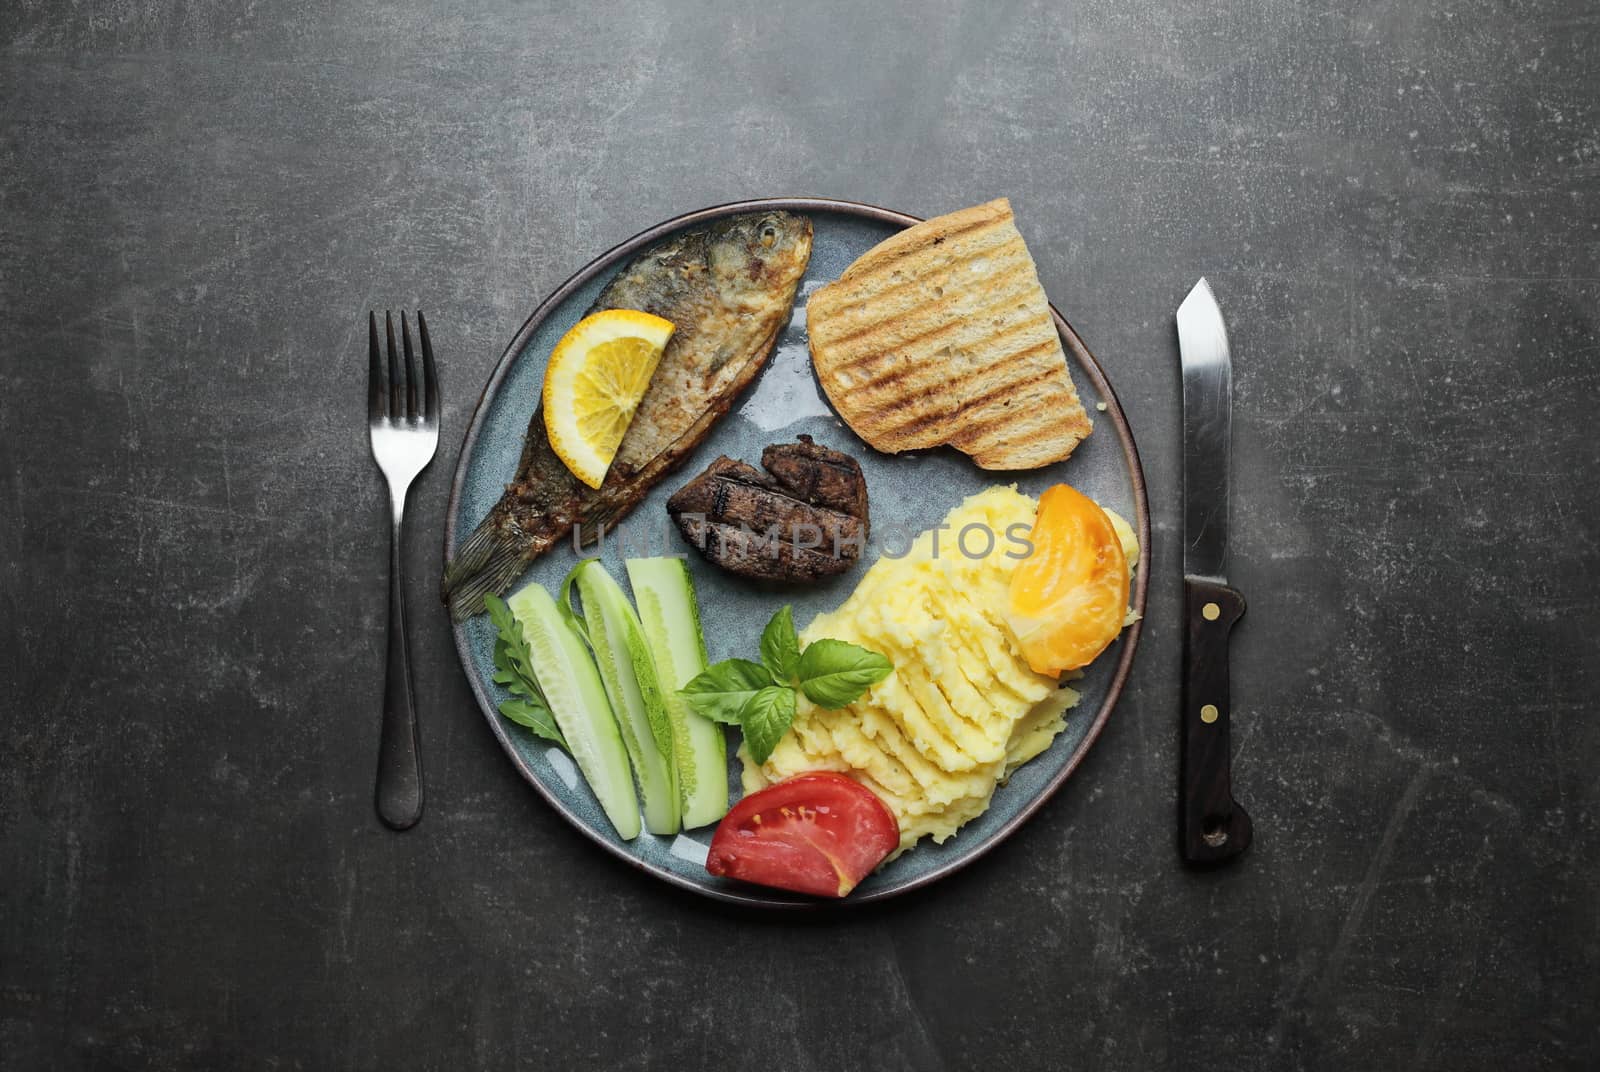 Fried fish, meat steak and vegetables on a plate. Concrete gray countertop. High quality photo